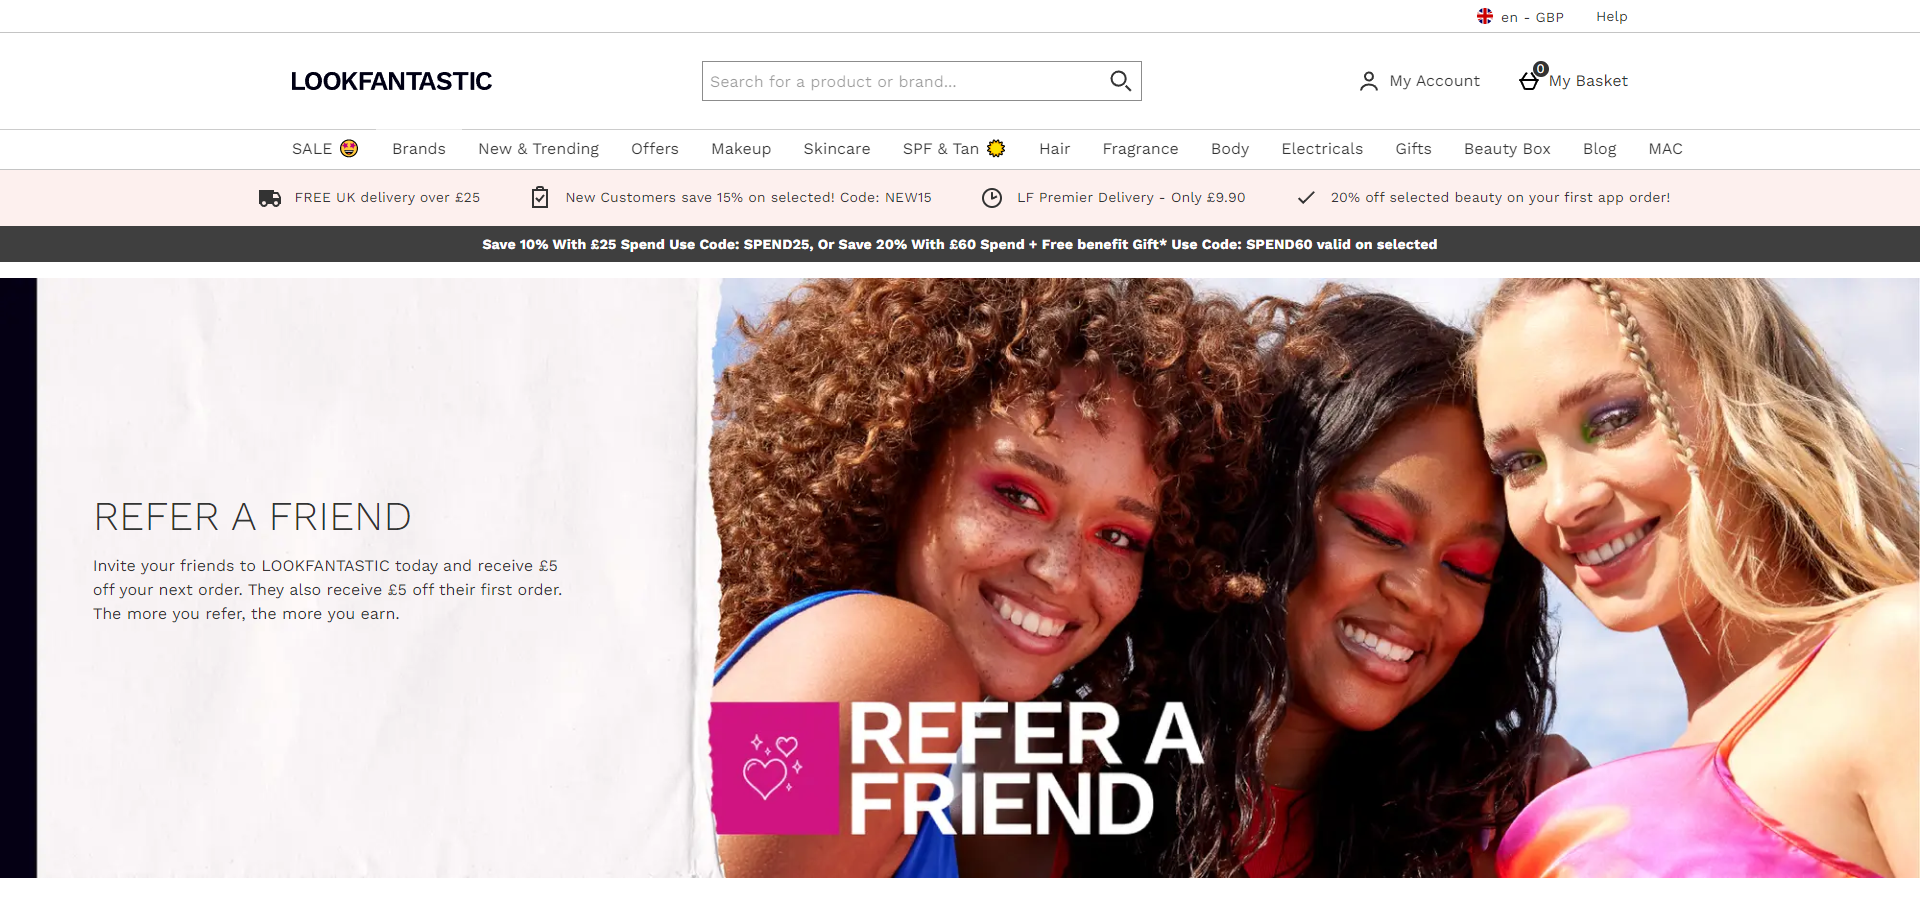 Referral Landing Page for Look Fantastic